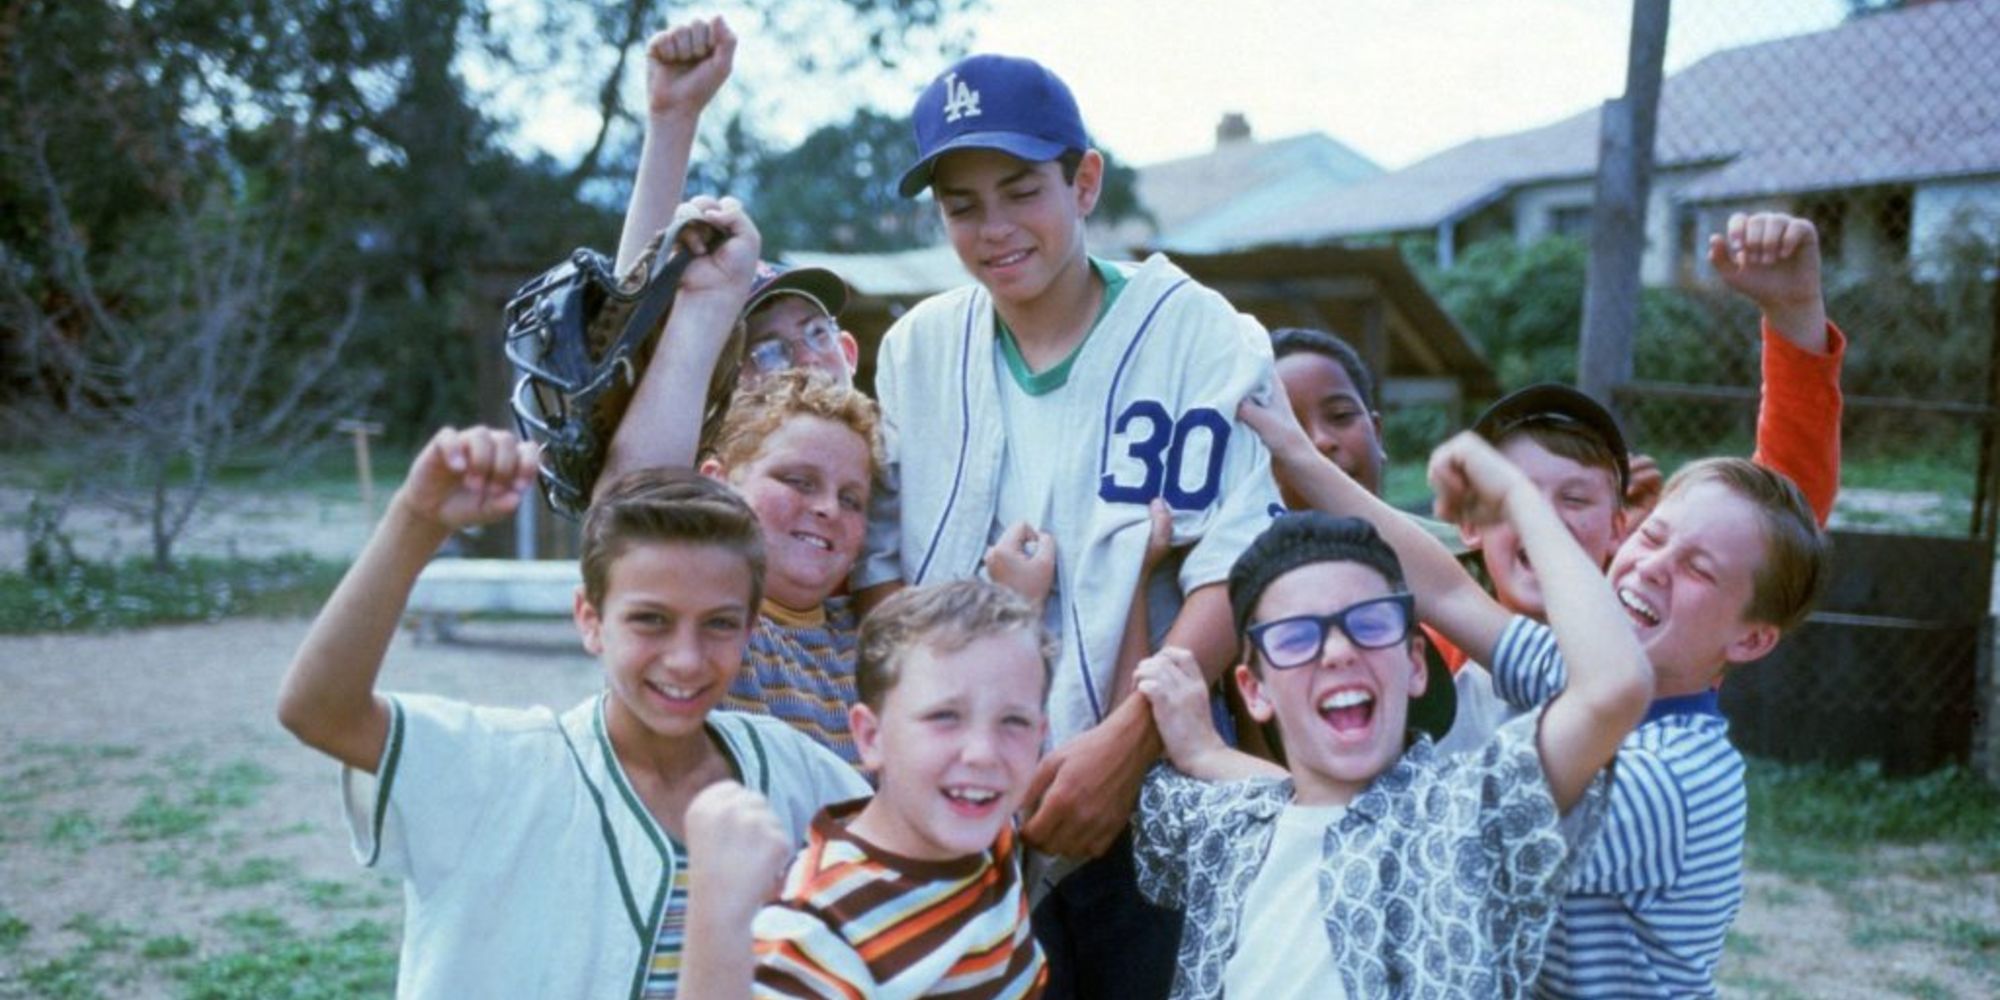 The kids from The Sandlot